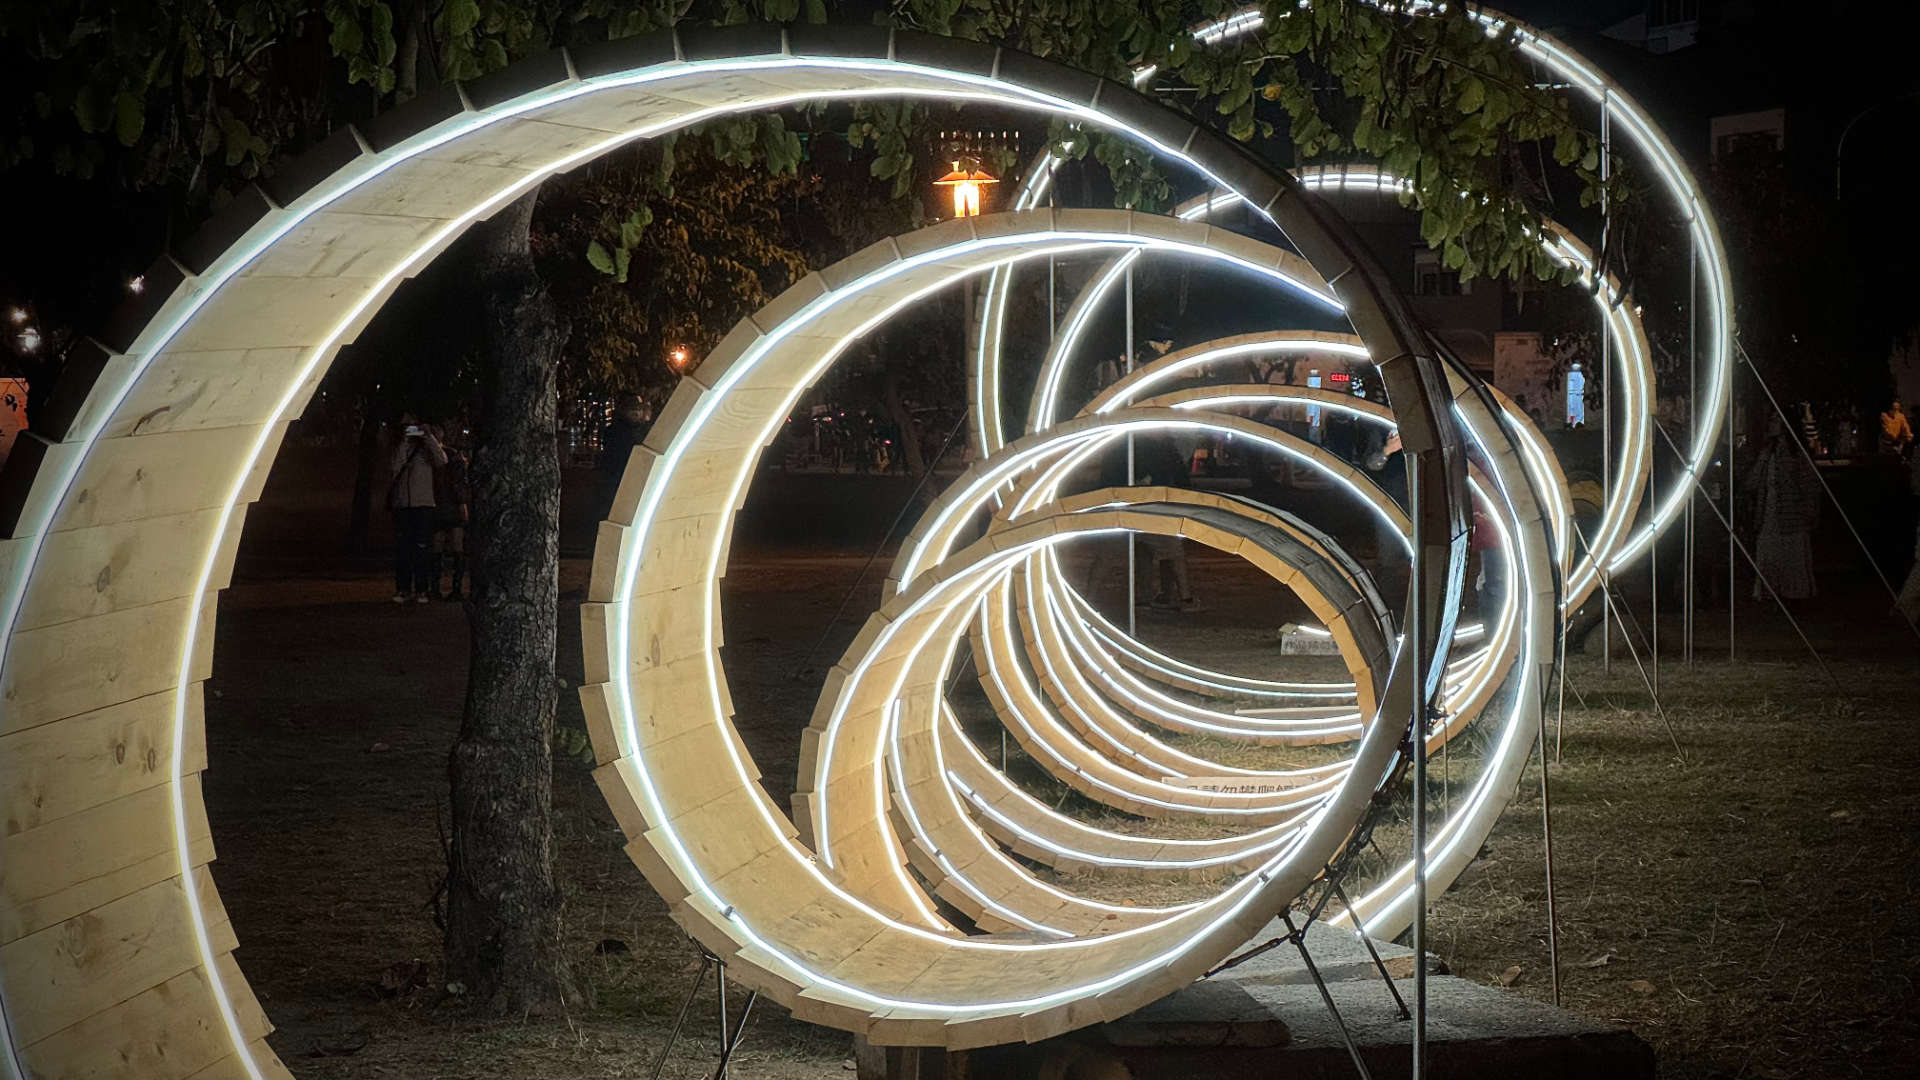 Illuminated sculpture of a 3D spiral stretched into the distance, made of wood.